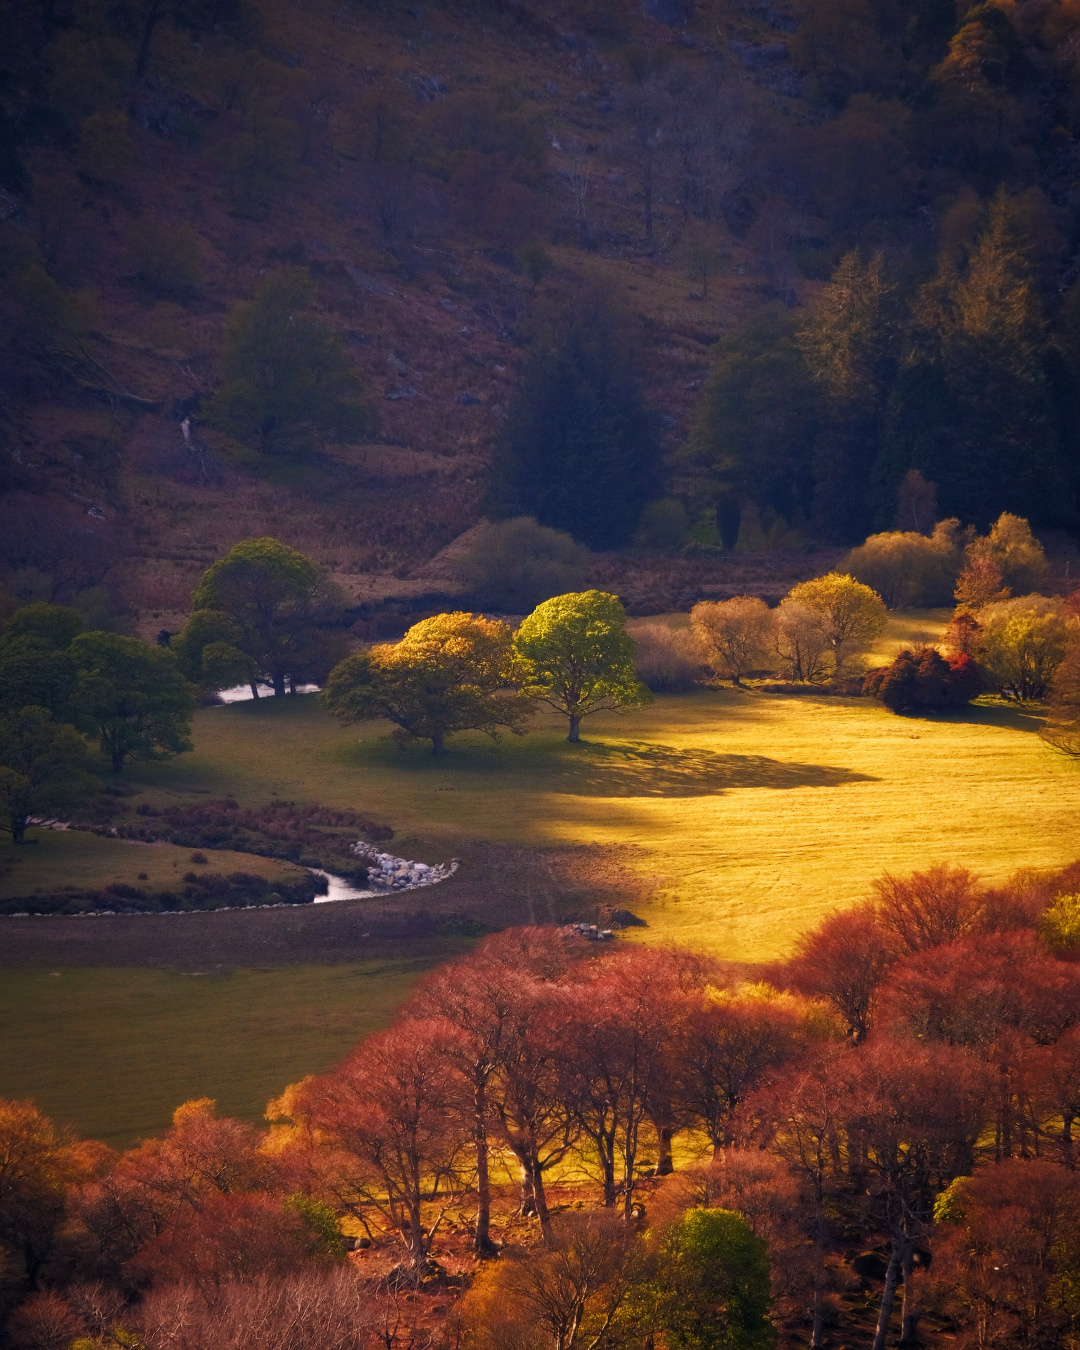 ...sunny meadows... ireland nature outdoors landscape countryside meadows fields river bend from above sun evening dusk sunset trees slopes hills wicklow moountains luggala guiness lake europe picturesque awe spectacular shades shadows tones titnts